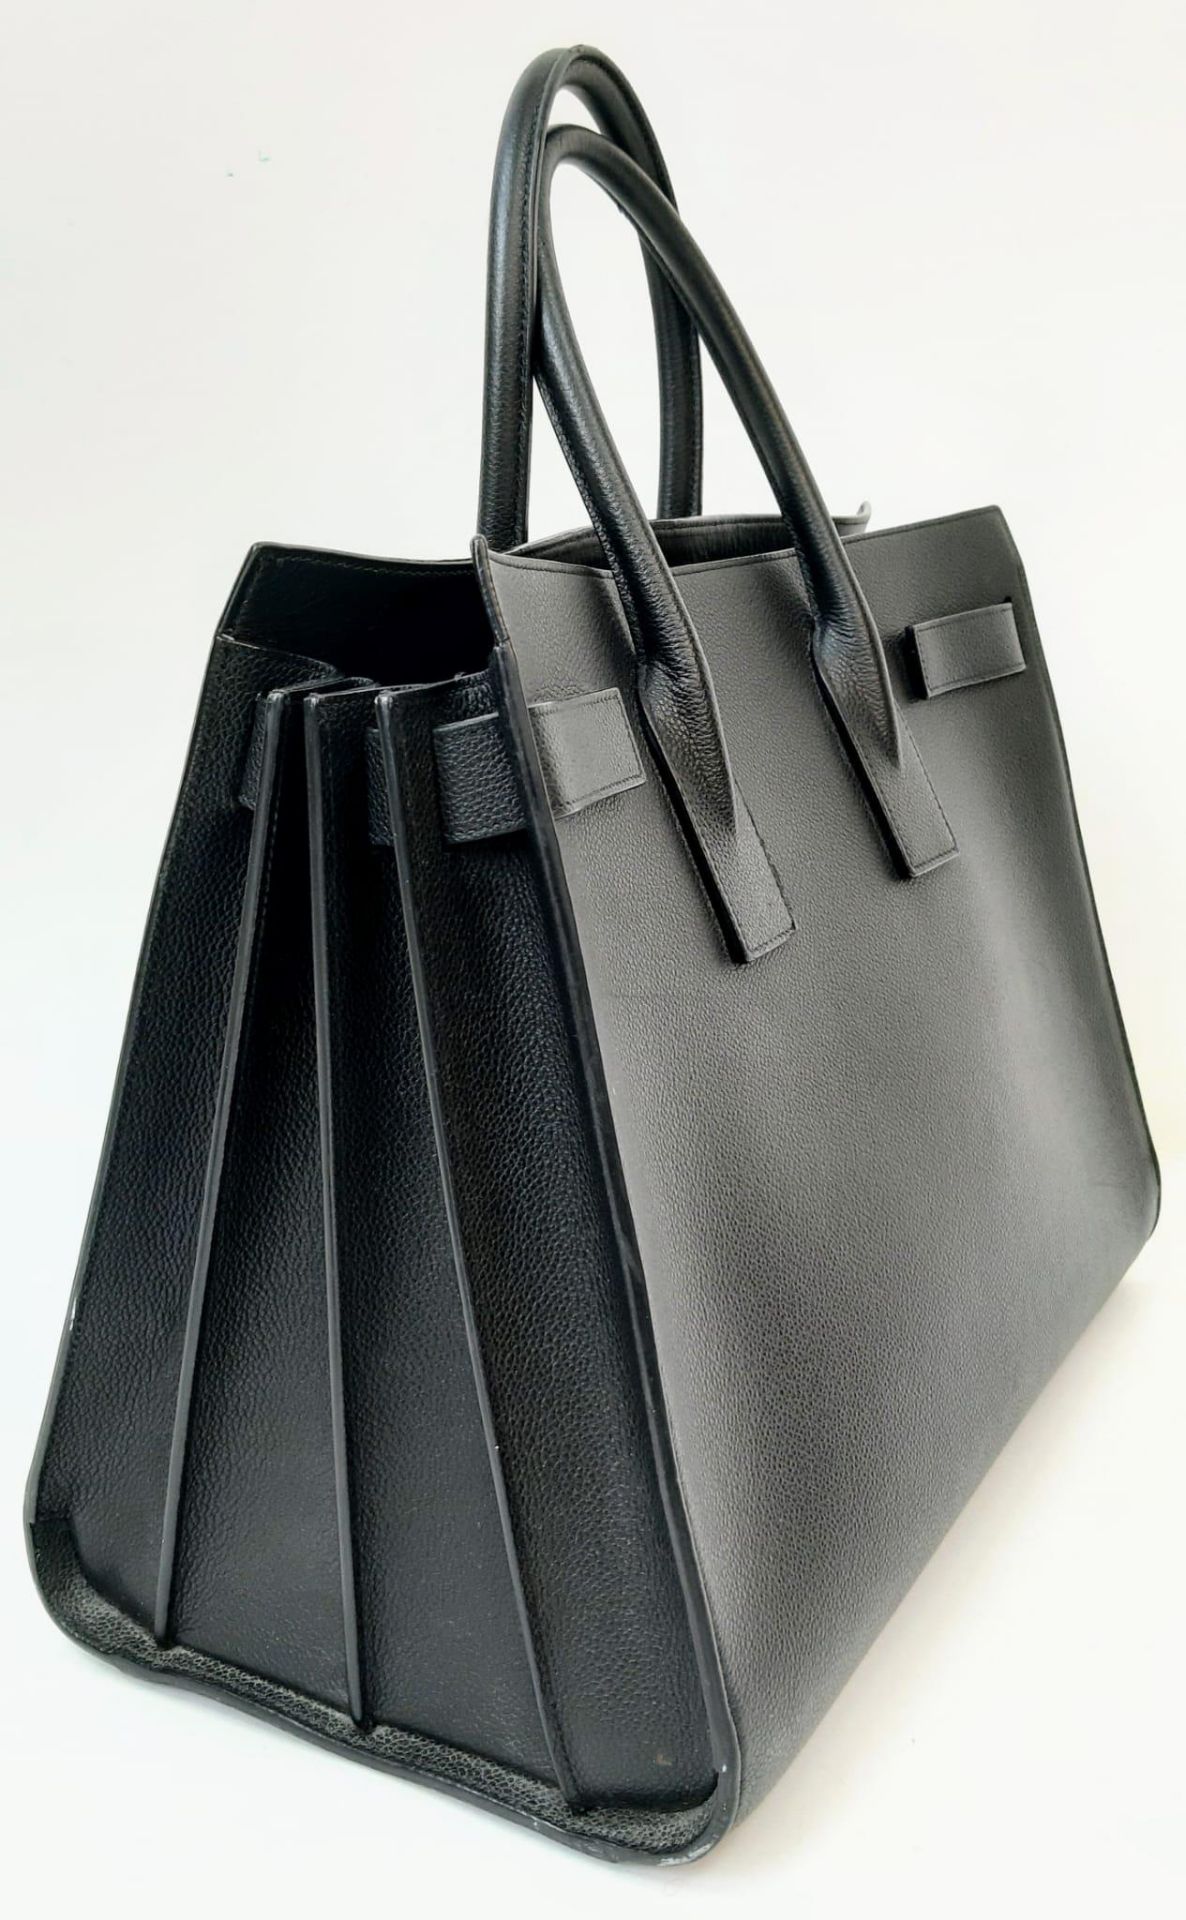 A Classy YSL Black Leather Sac de Jour Tote Bag. Textured calf leather exterior with twin handles. - Bild 4 aus 8